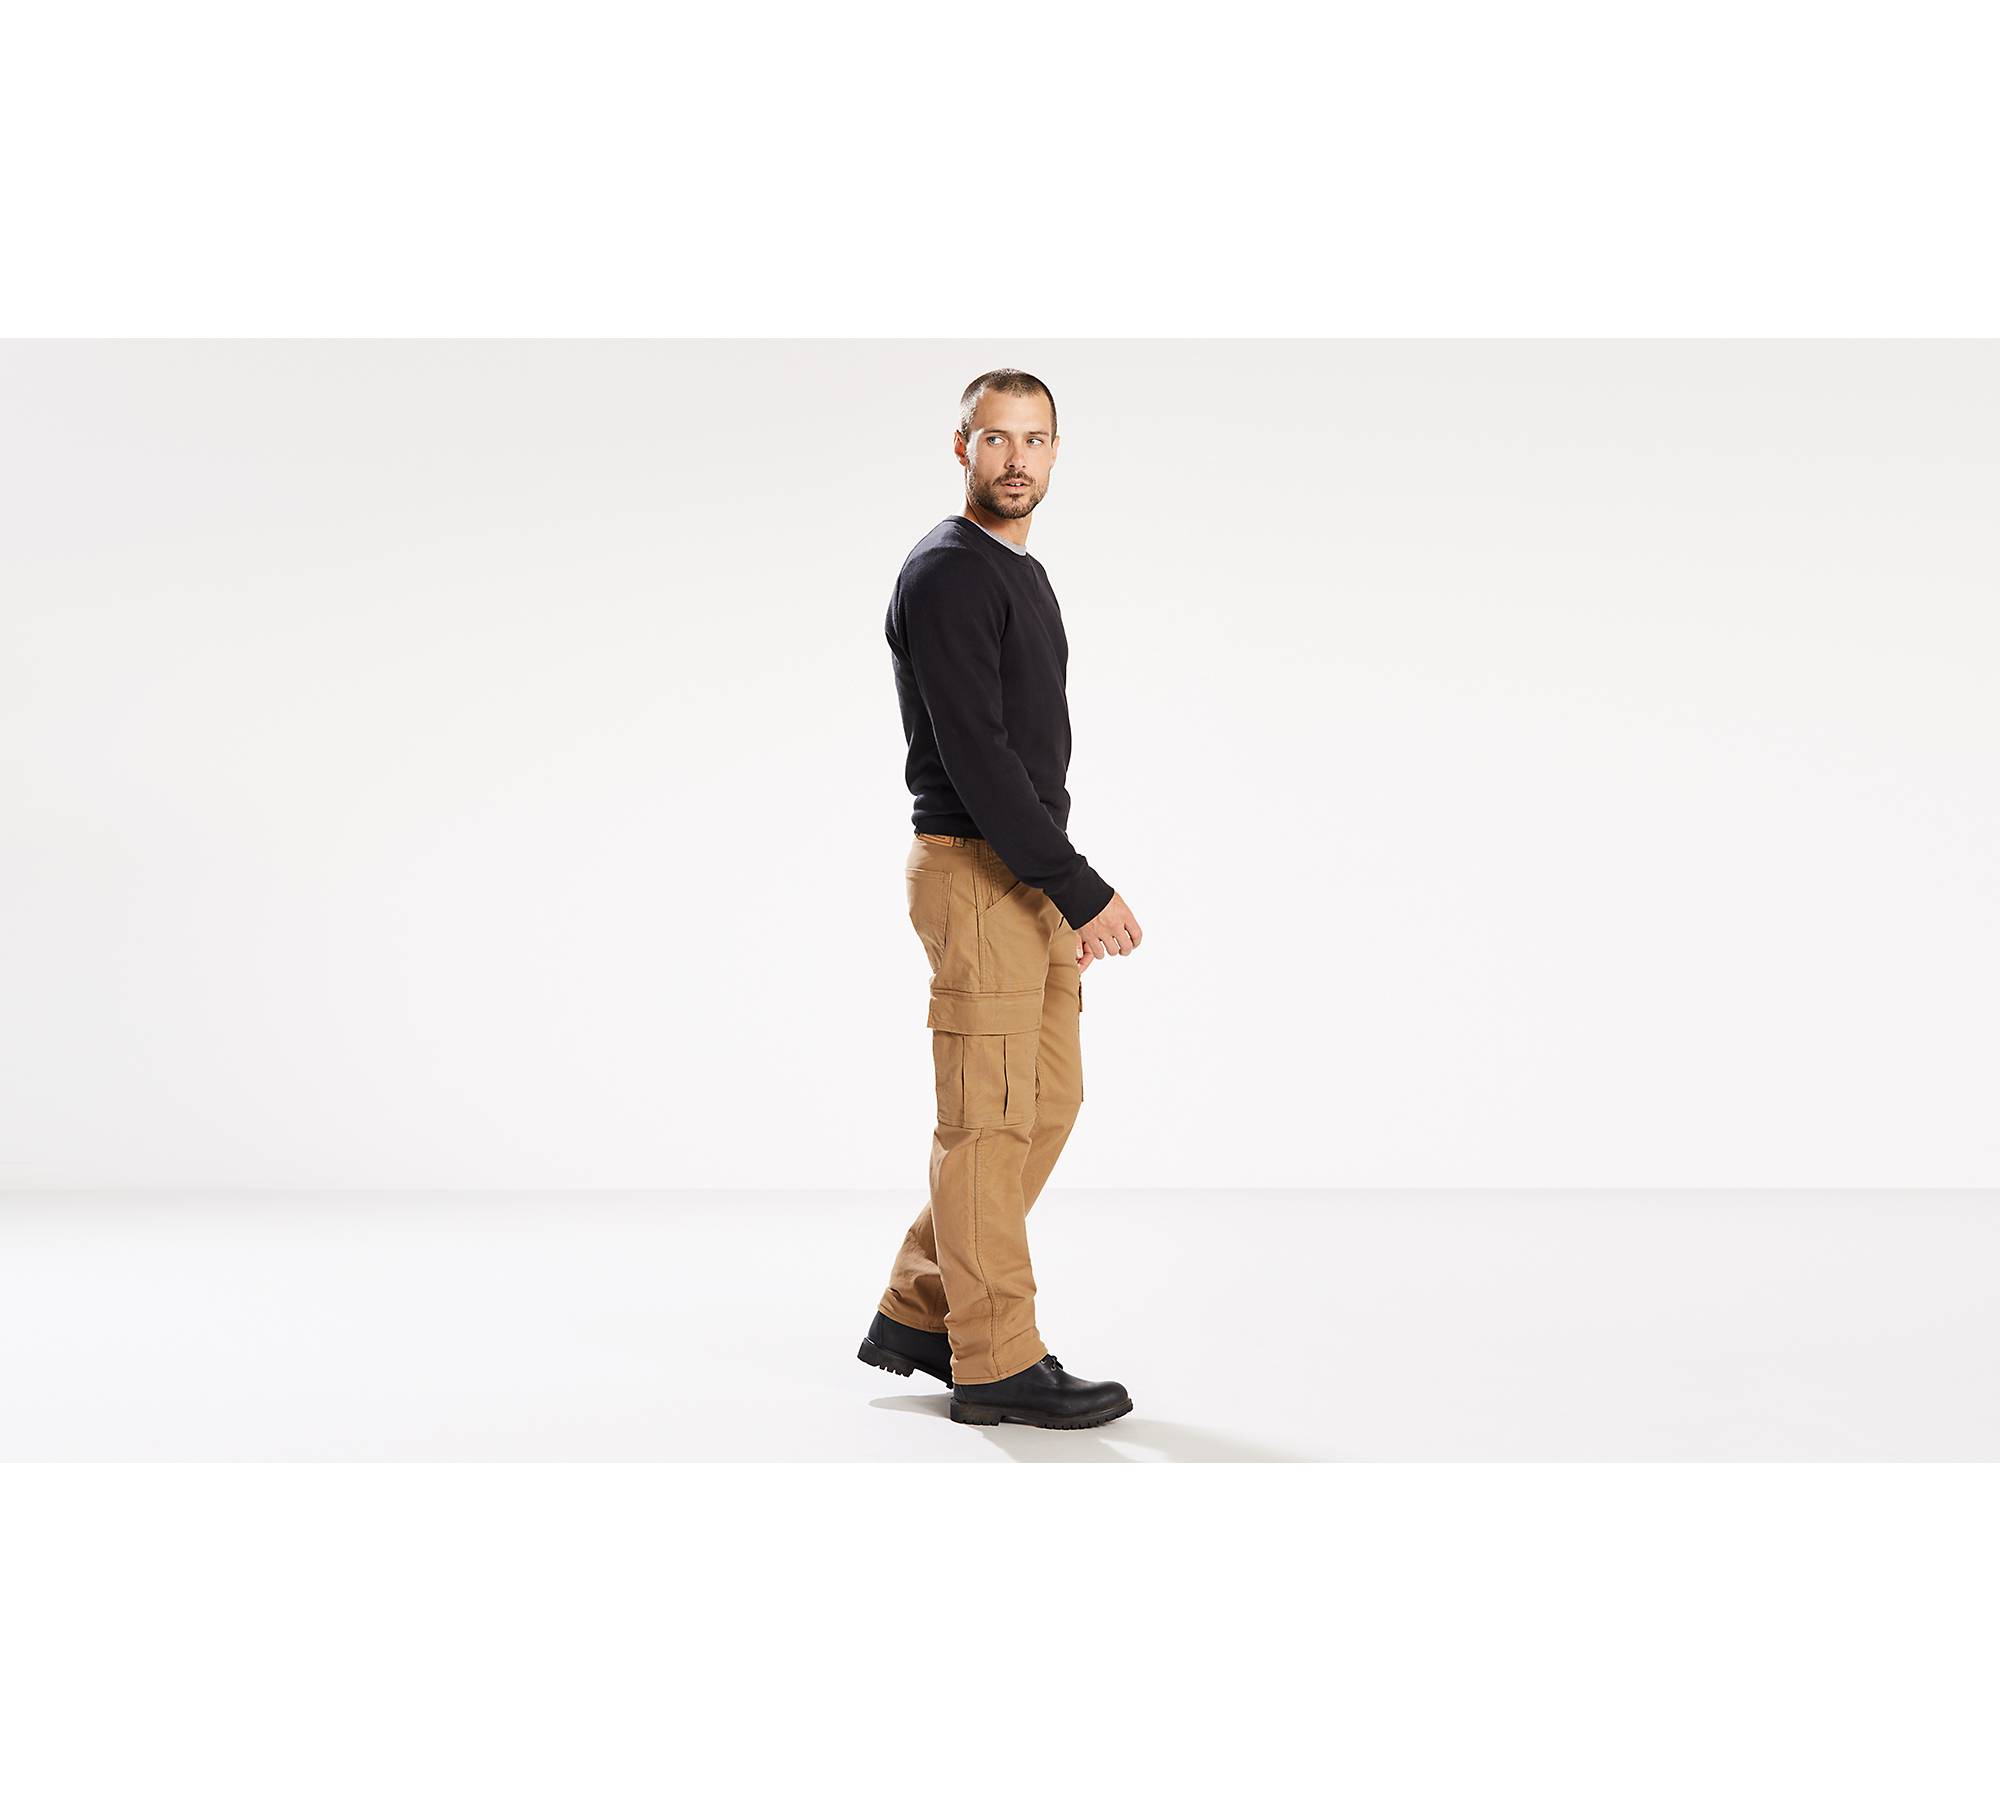 Men's Workwear Relaxed Fit Cargo Pant